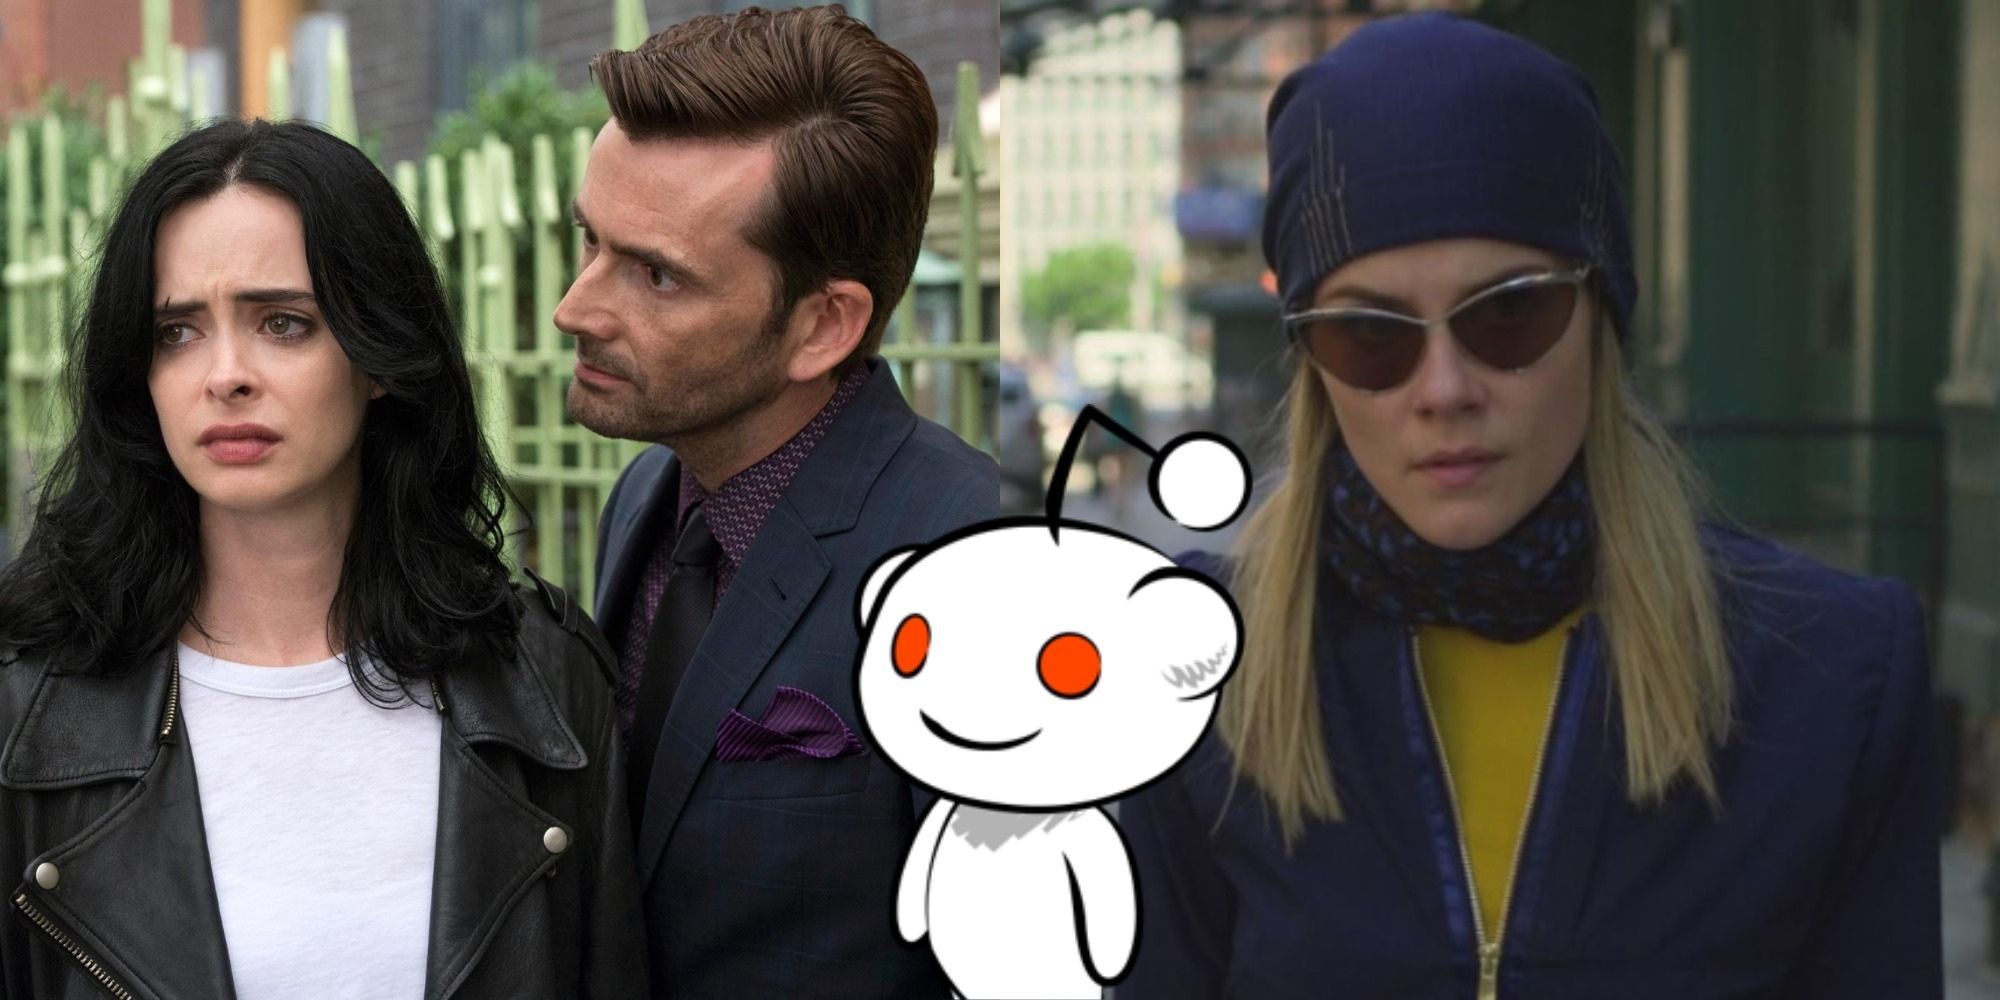 Split image showing Jessica Jones and Kilgrave, and Trish along with Snoo from Reddit.